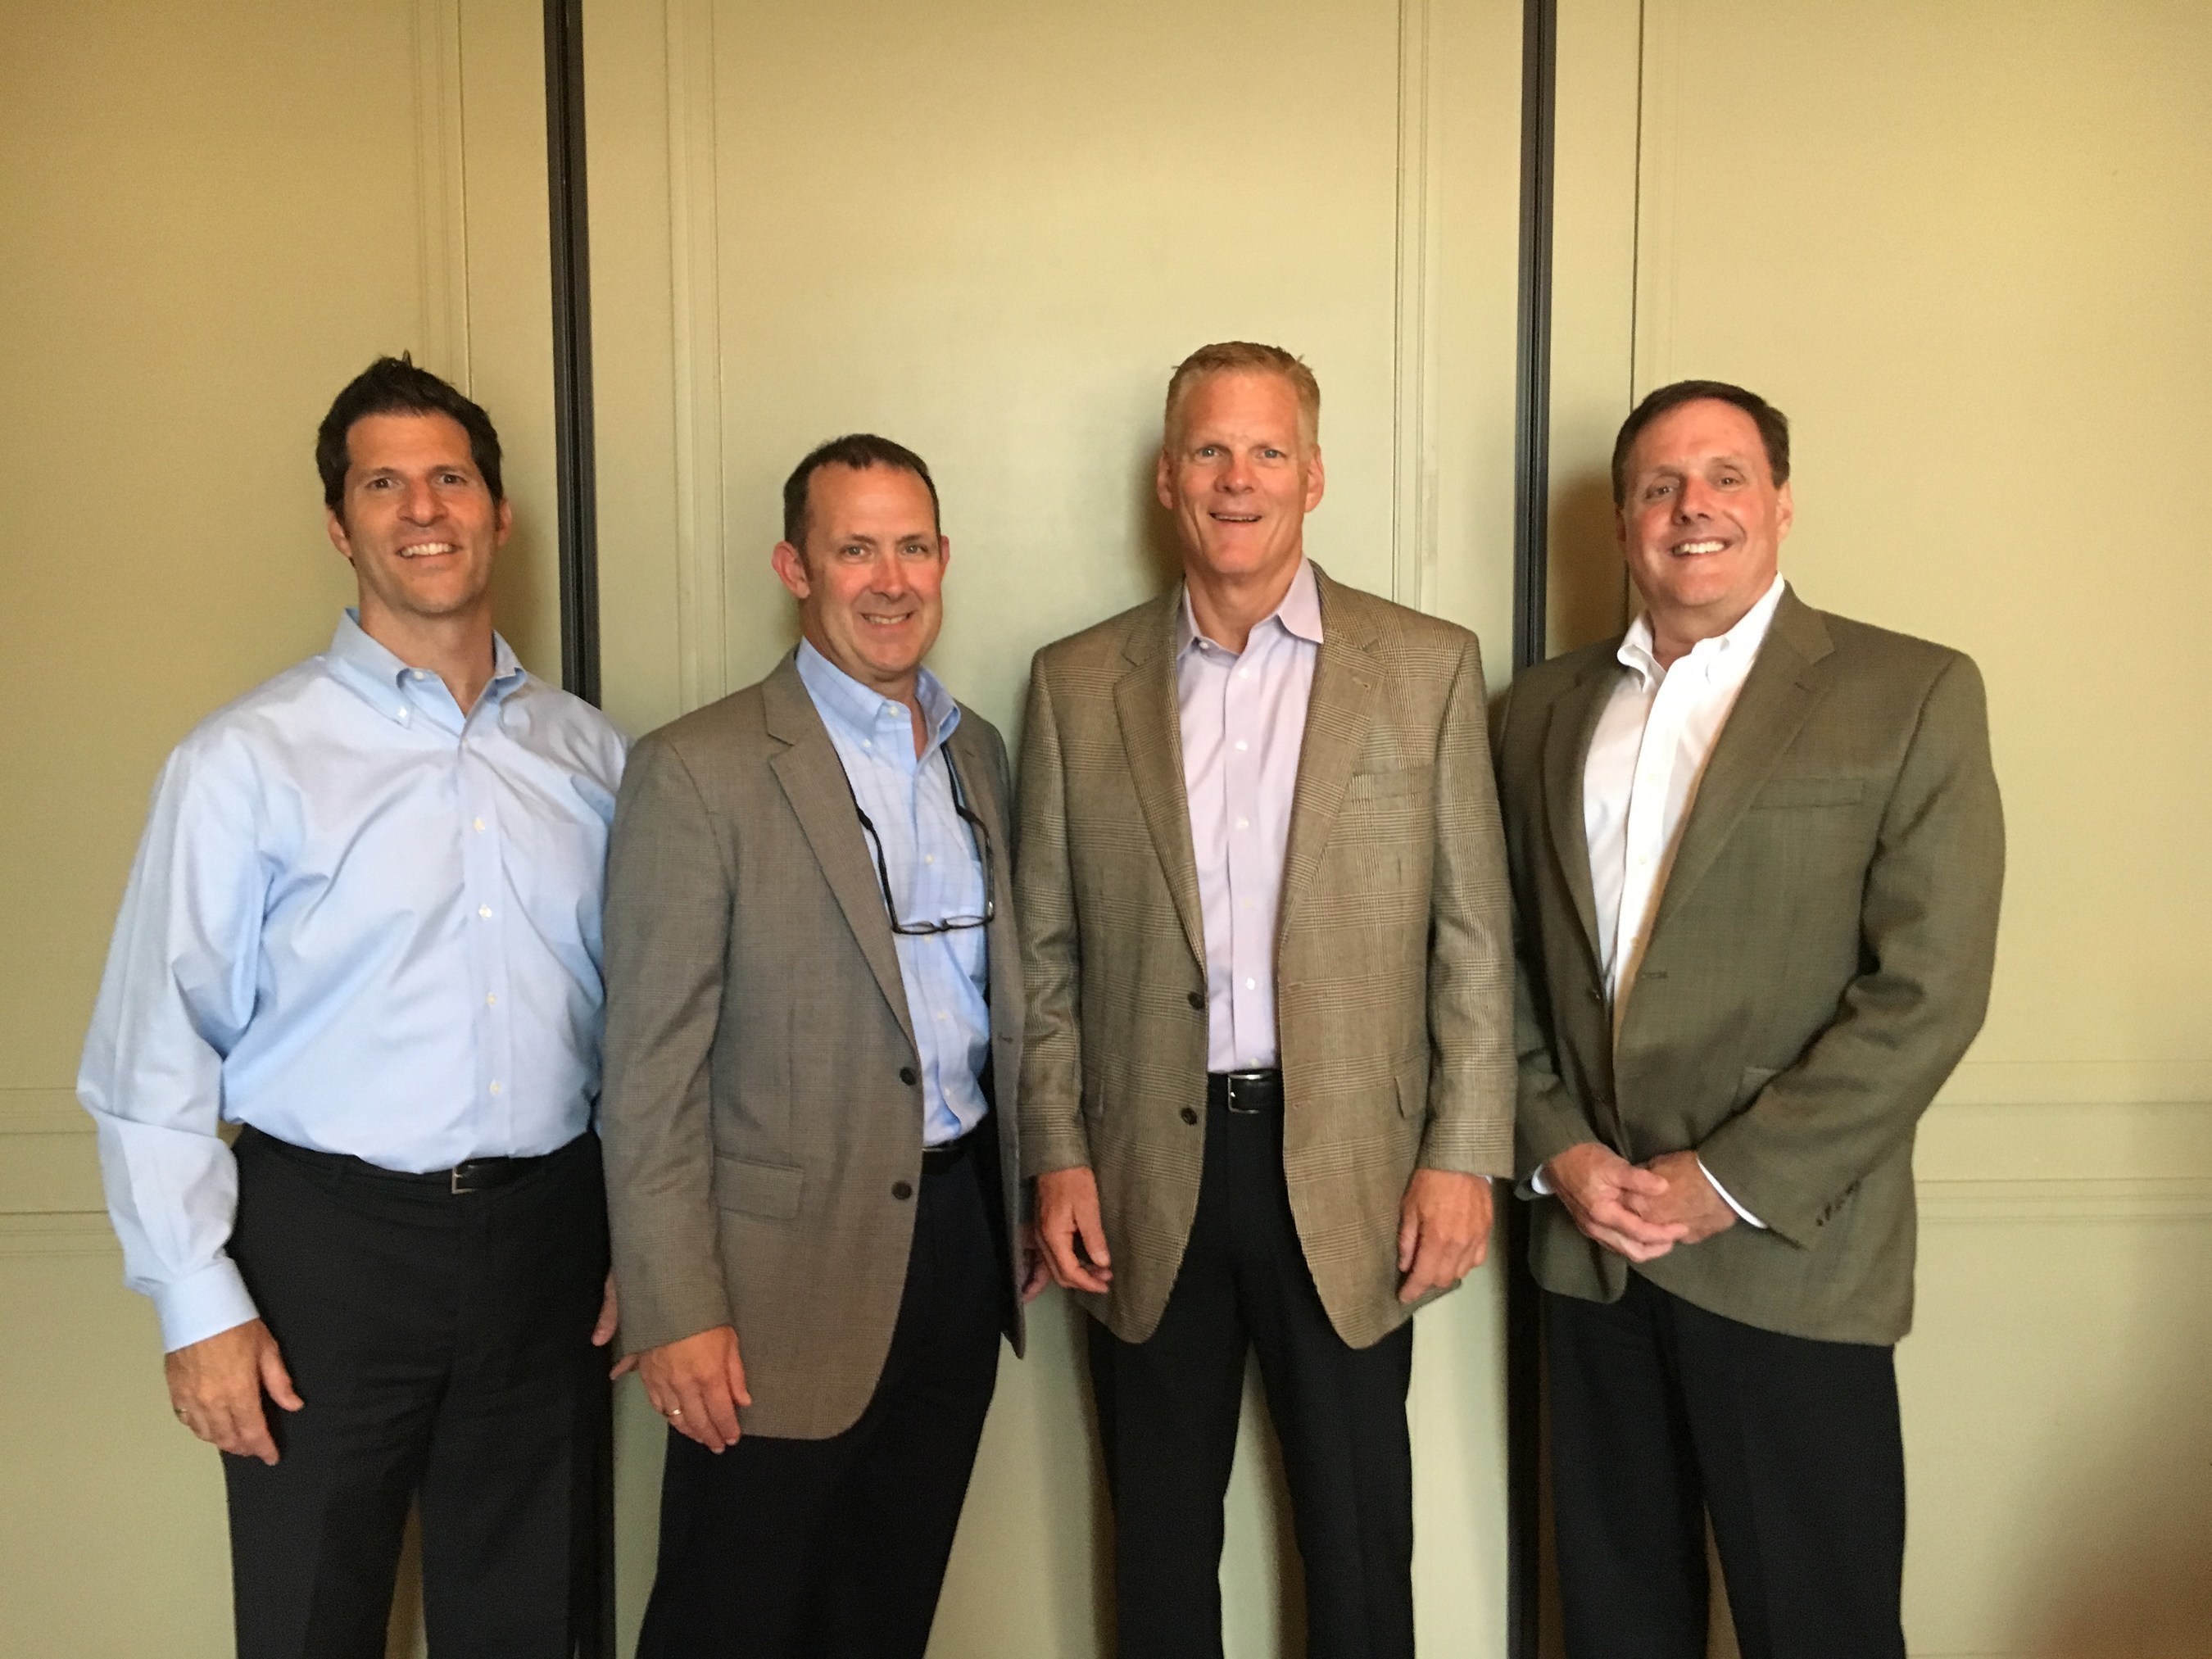 The newly formed HTS New England will be led by Emery George, vice president of Stebbins-Duffy, and three current HTS New England principals, Peter Foss, Jeff Ritchie, and Dan Senese. Left to right: Dan Senese, Emery George, Jeff Ritchie, Peter Foss